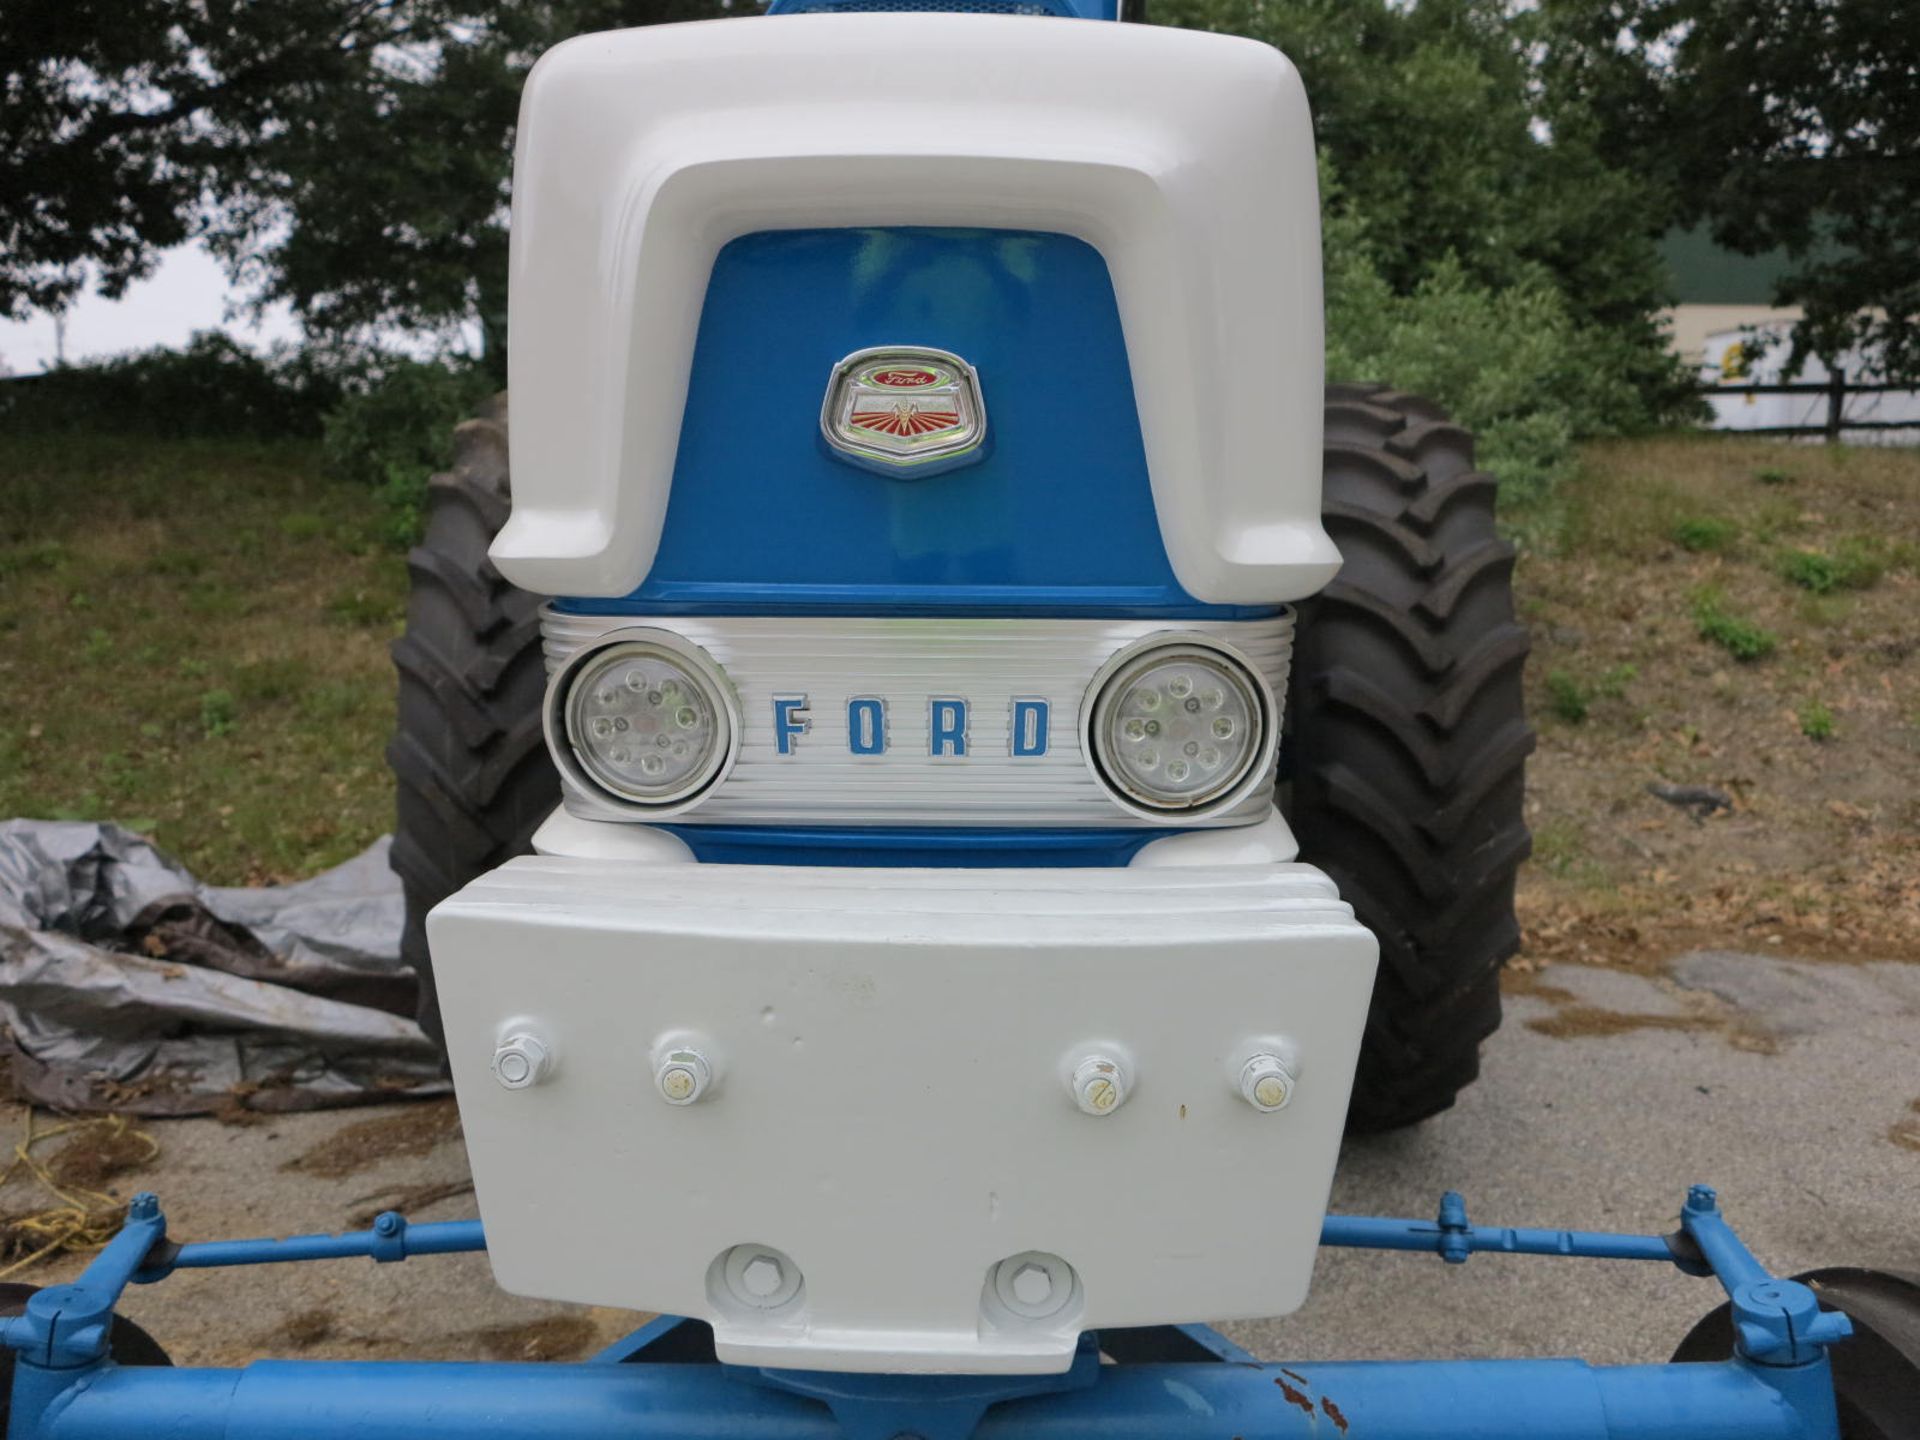 1960 Ford Diesel 6000 Tractor Frame Off Restoration Ford Diesel Engine New Duramax 18.4-38 Rear - Image 23 of 48